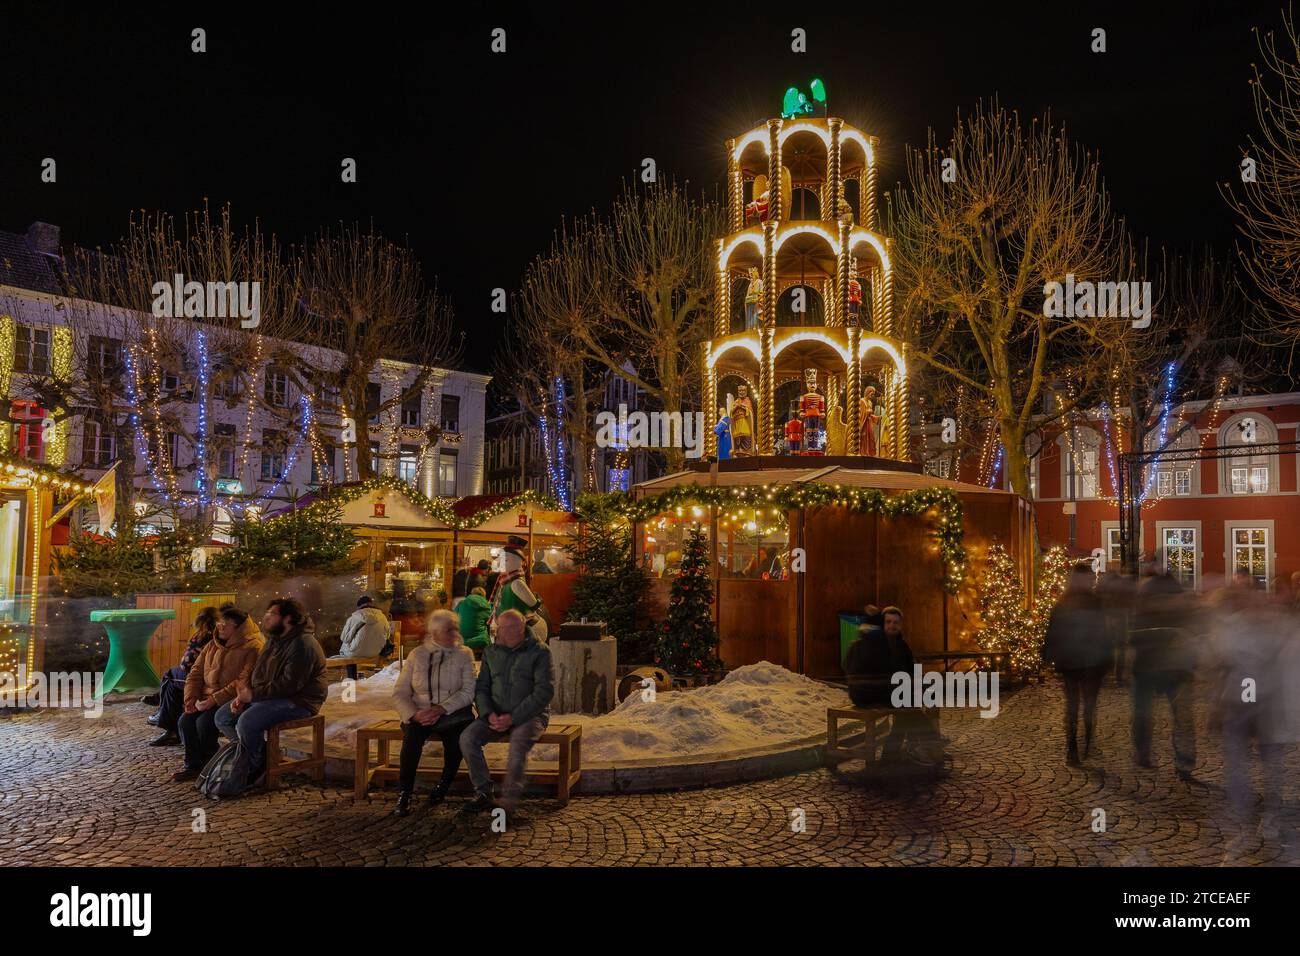 The Christmas market in downtown Maastricht which is very popular among tourist with annual on average 1 million visitors in the month of December Stock Photo